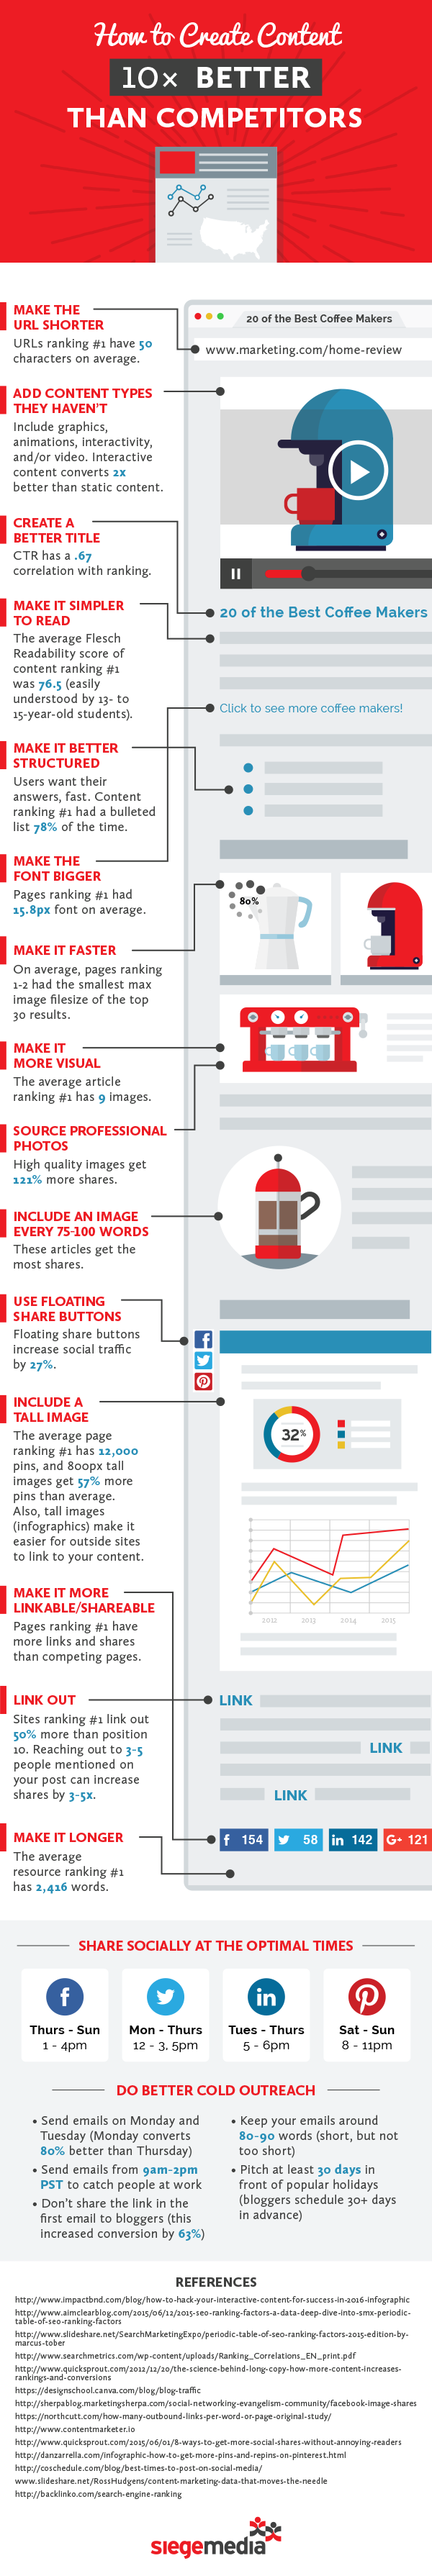 how-to-increase-website-traffic-infographic-image